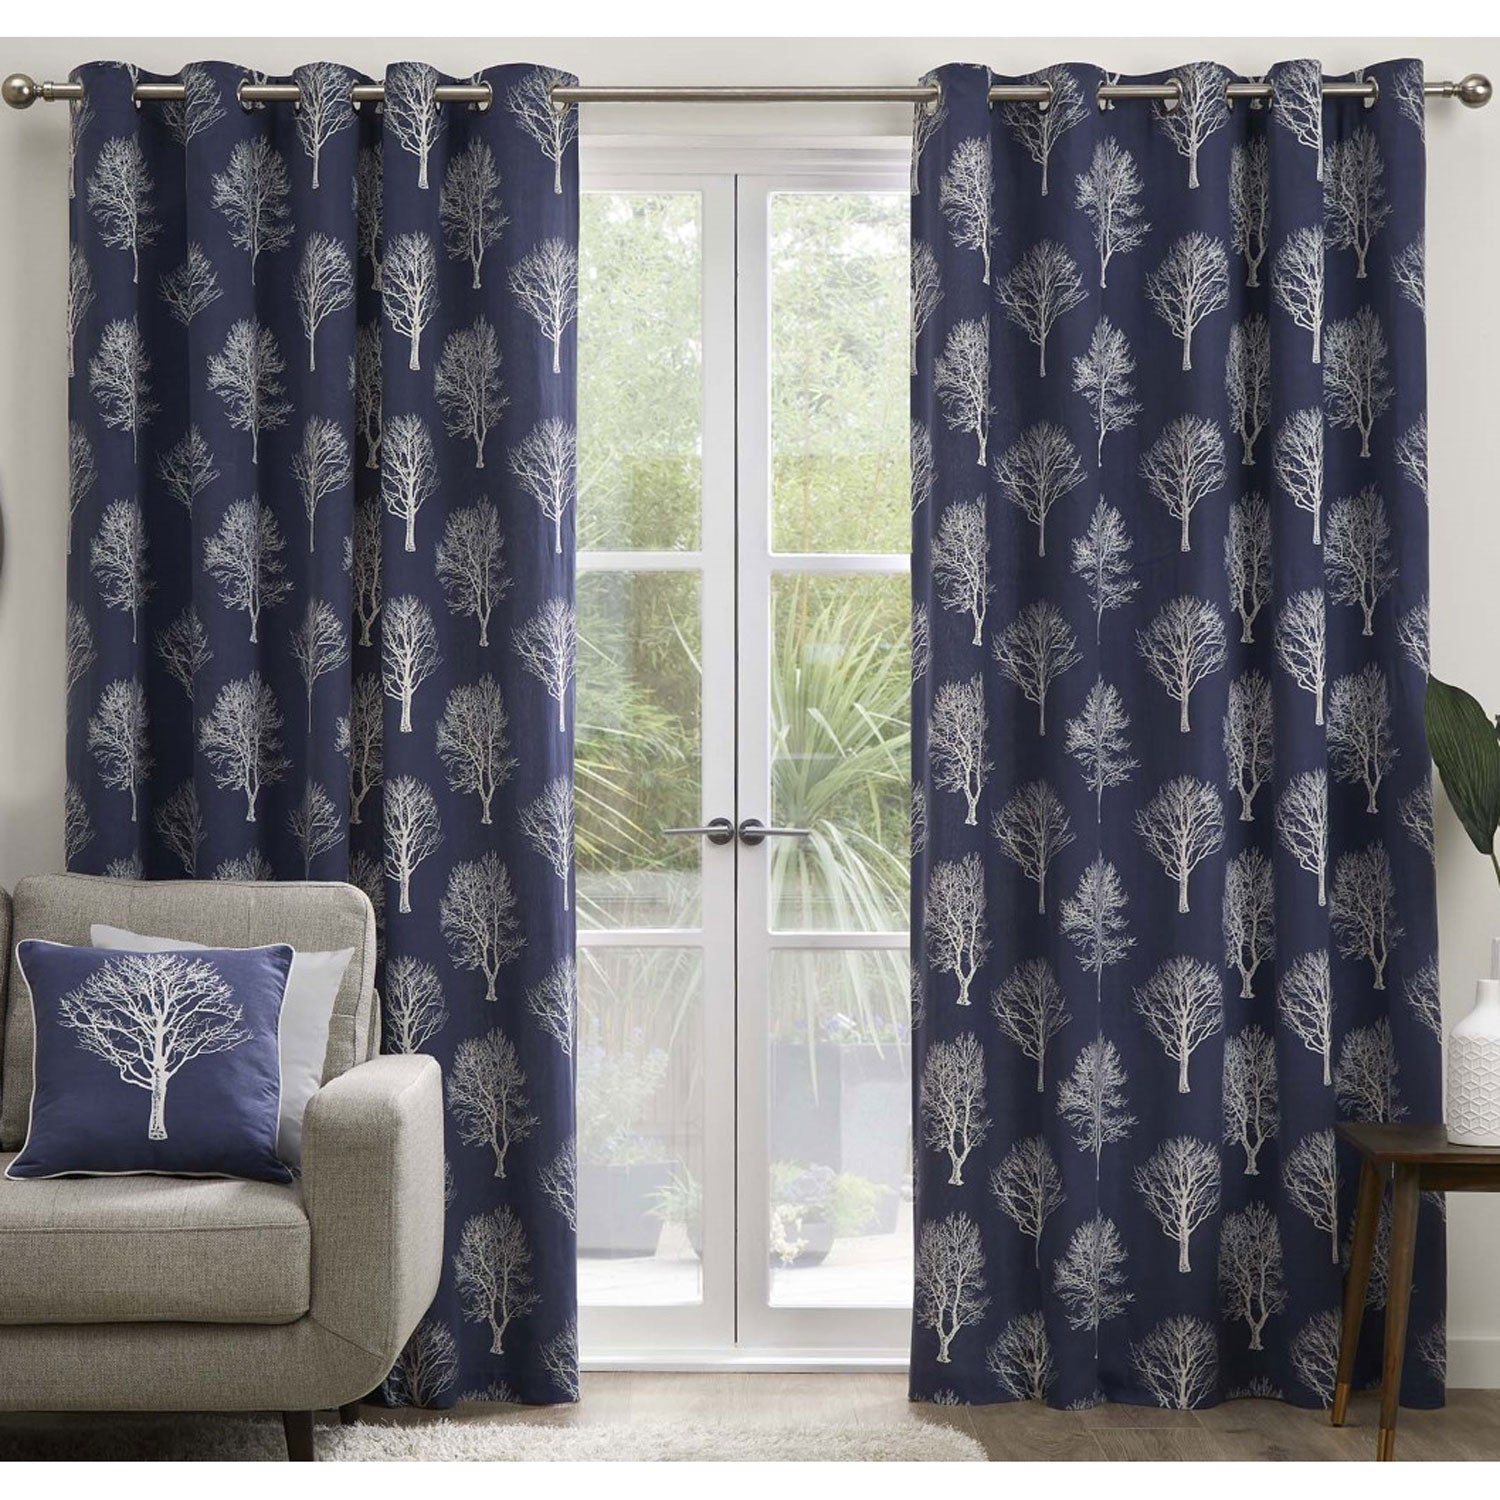 The Home Bedroom Woodland Trees Eyelet Curtains - Navy 1 Shaws Department Stores